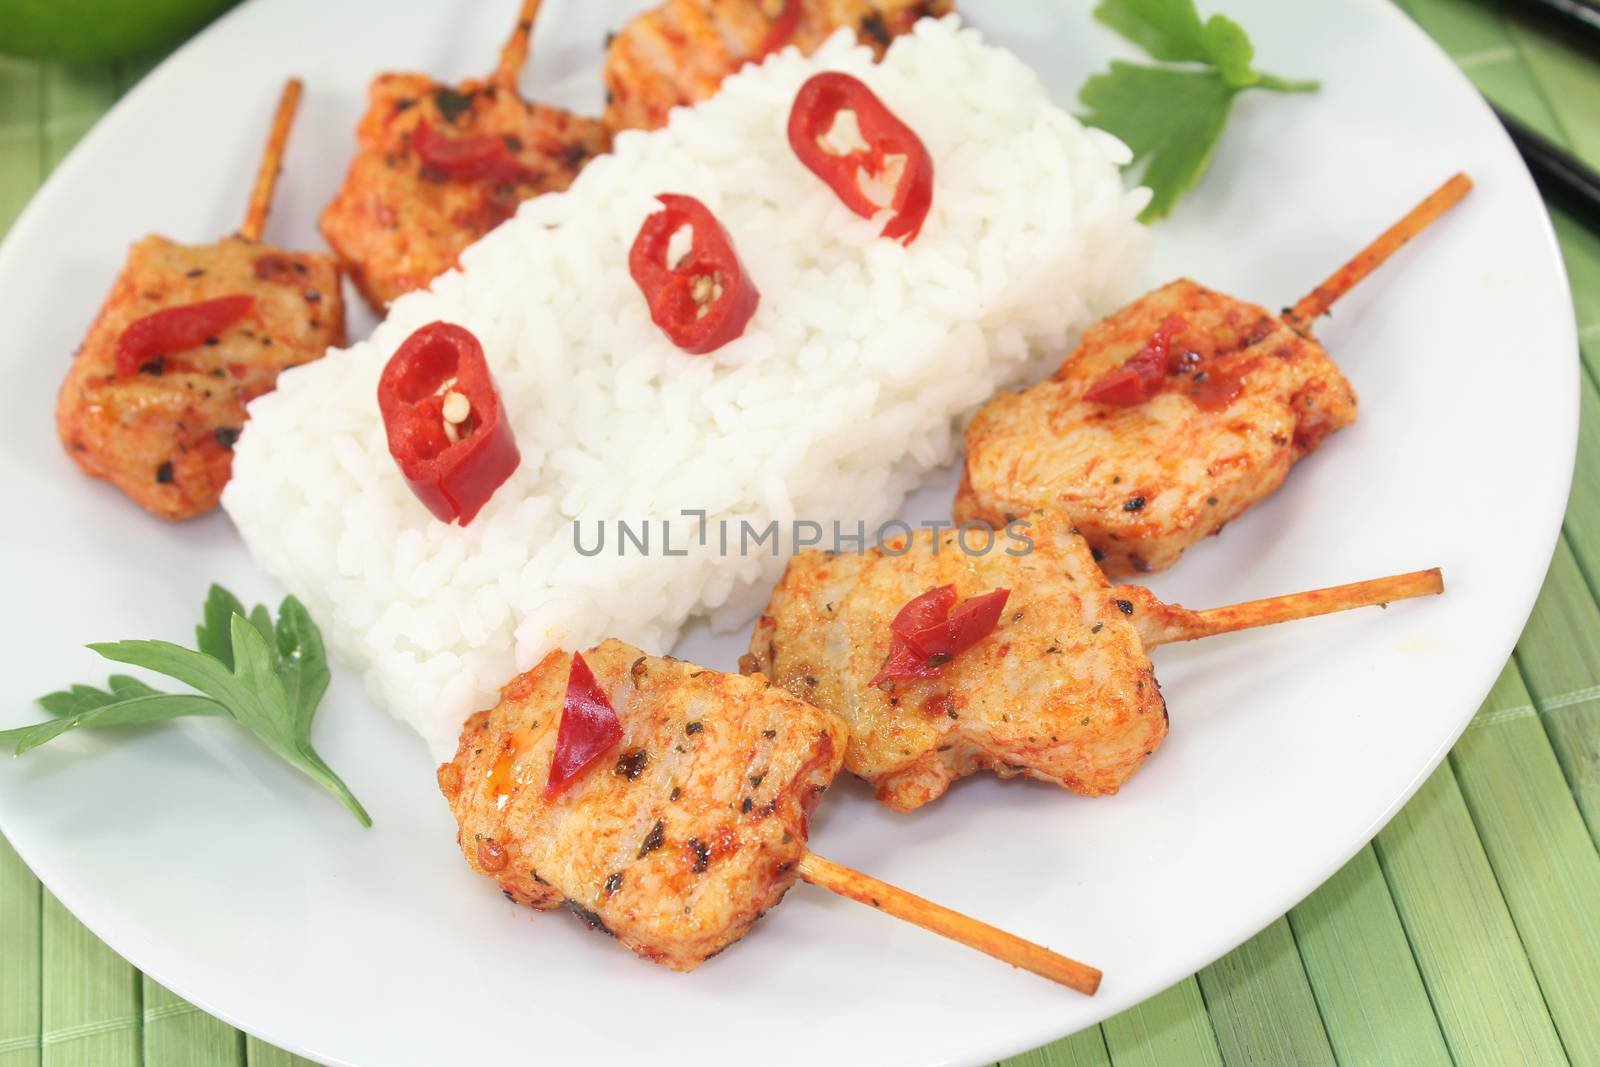 Asian sate skewers with rice, chili and peanut sauce